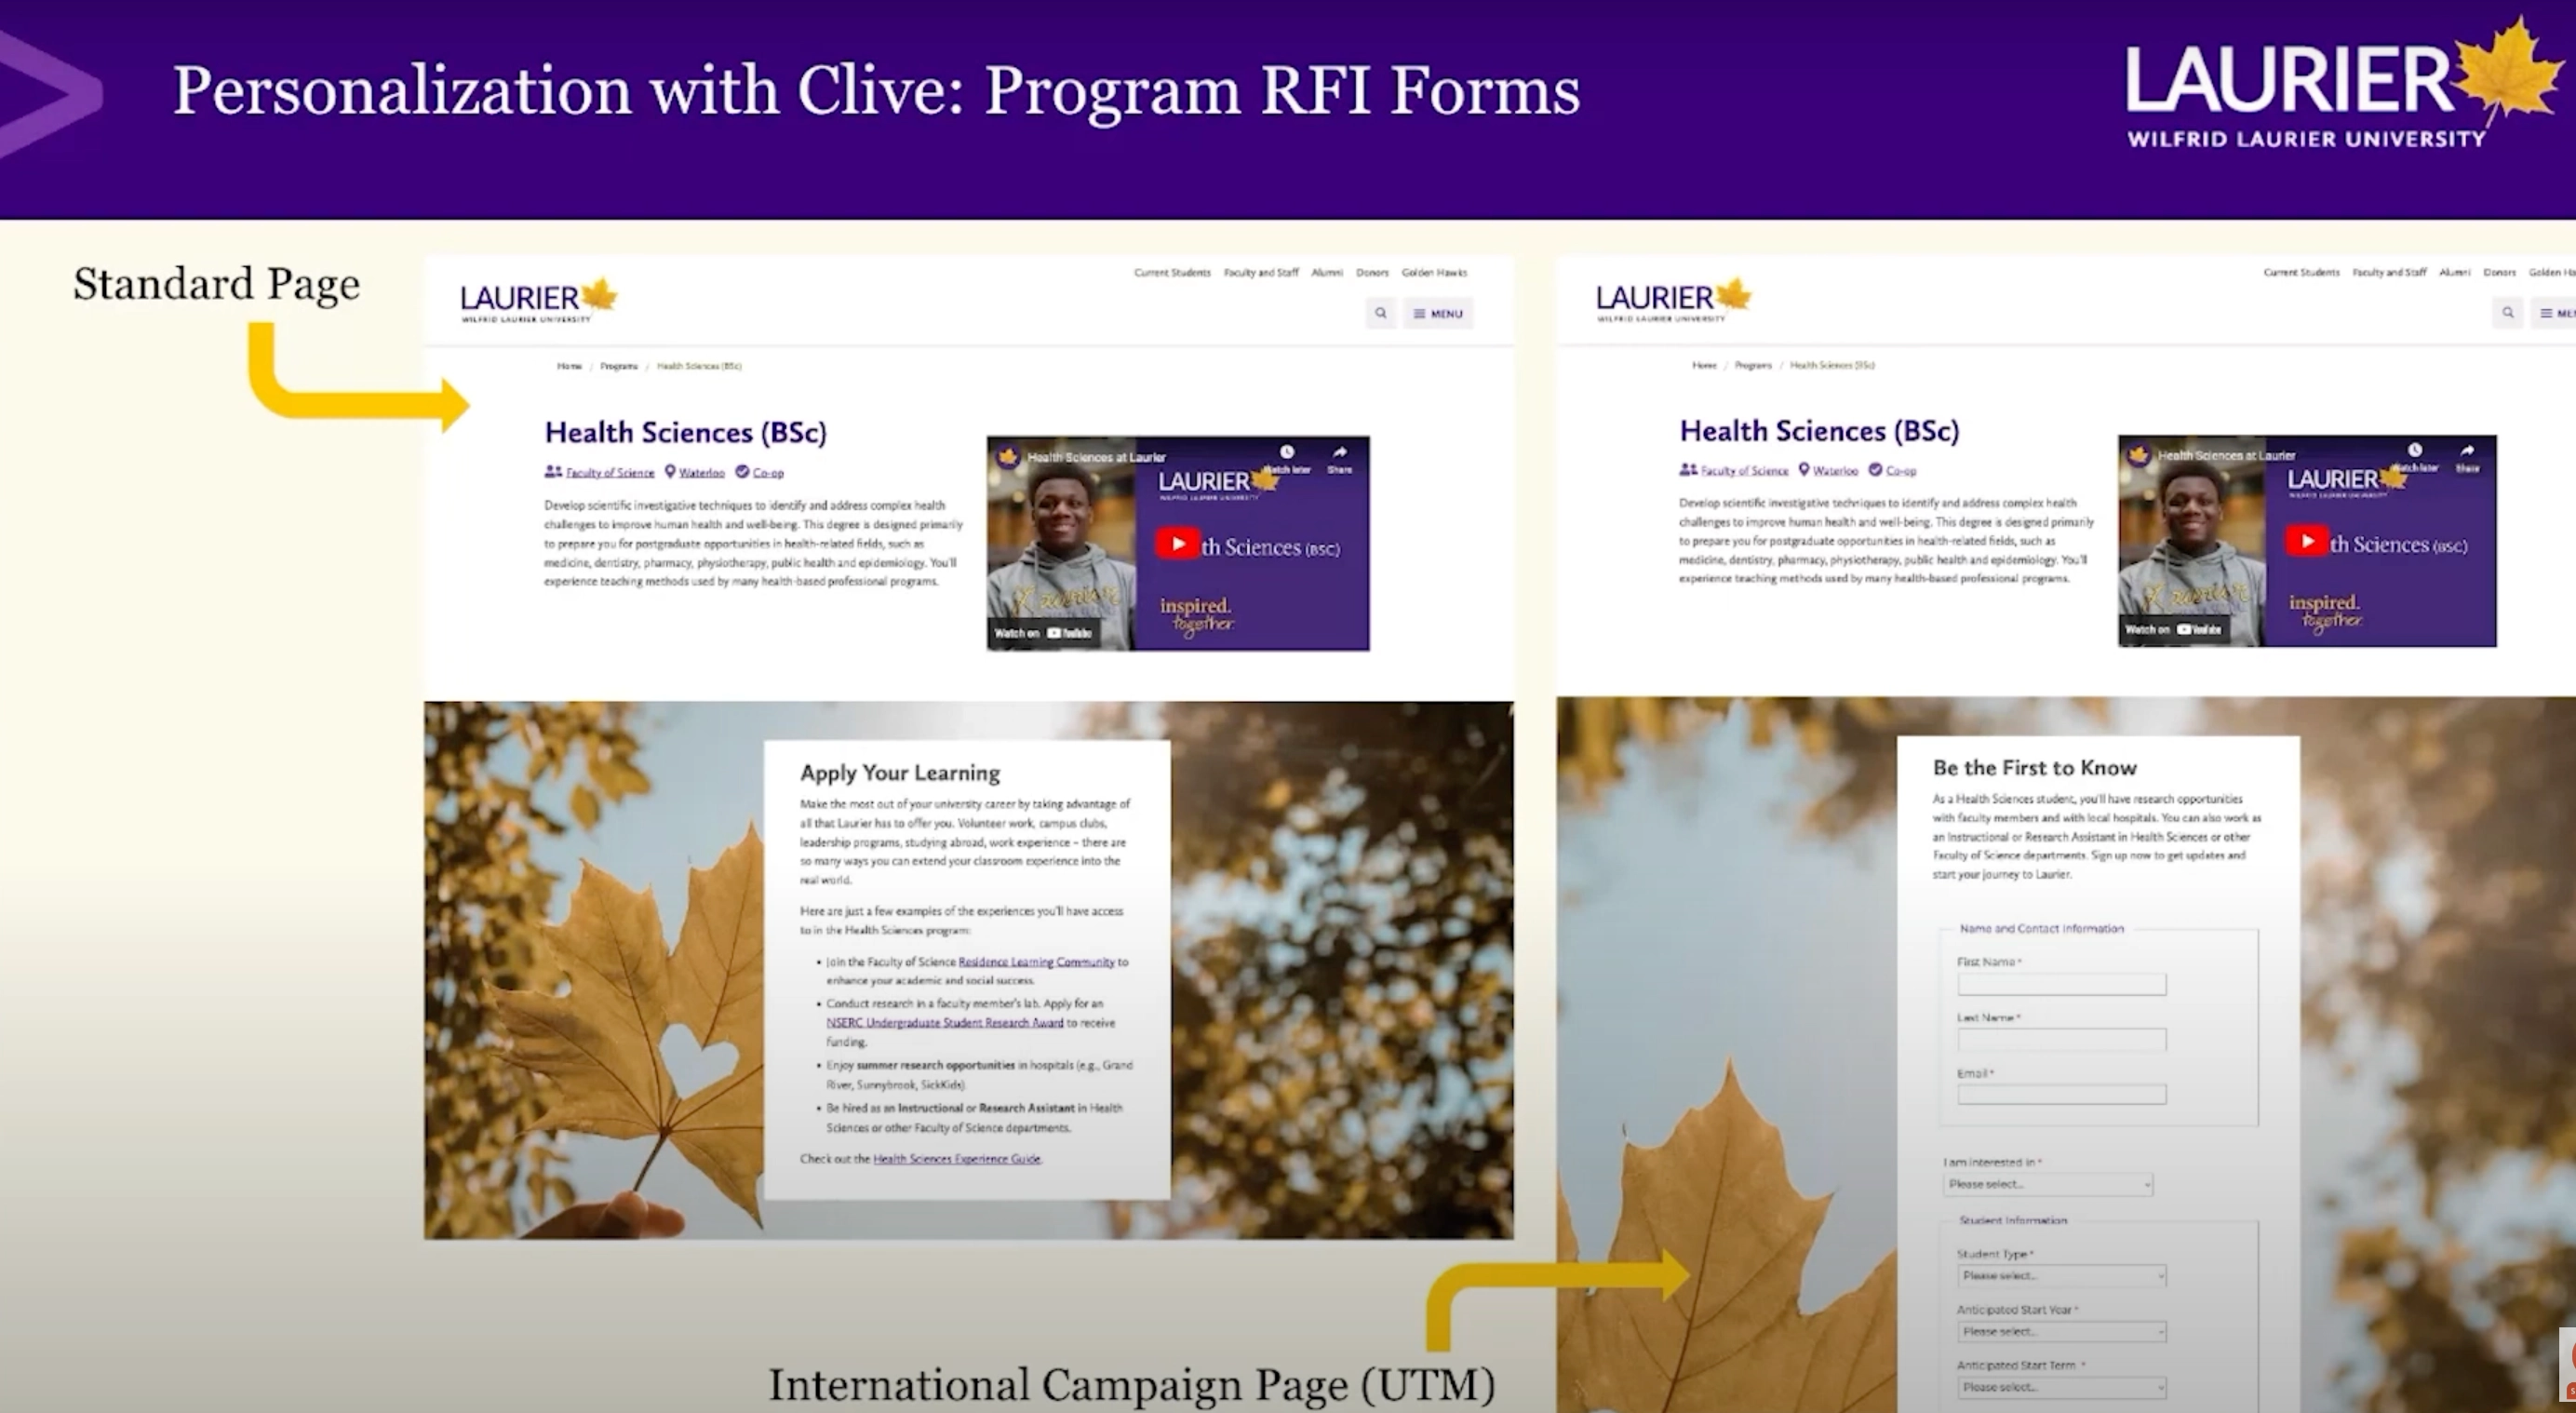 A slide compares standard and international campaign pages for Wilfrid Laurier University's Health Sciences program.